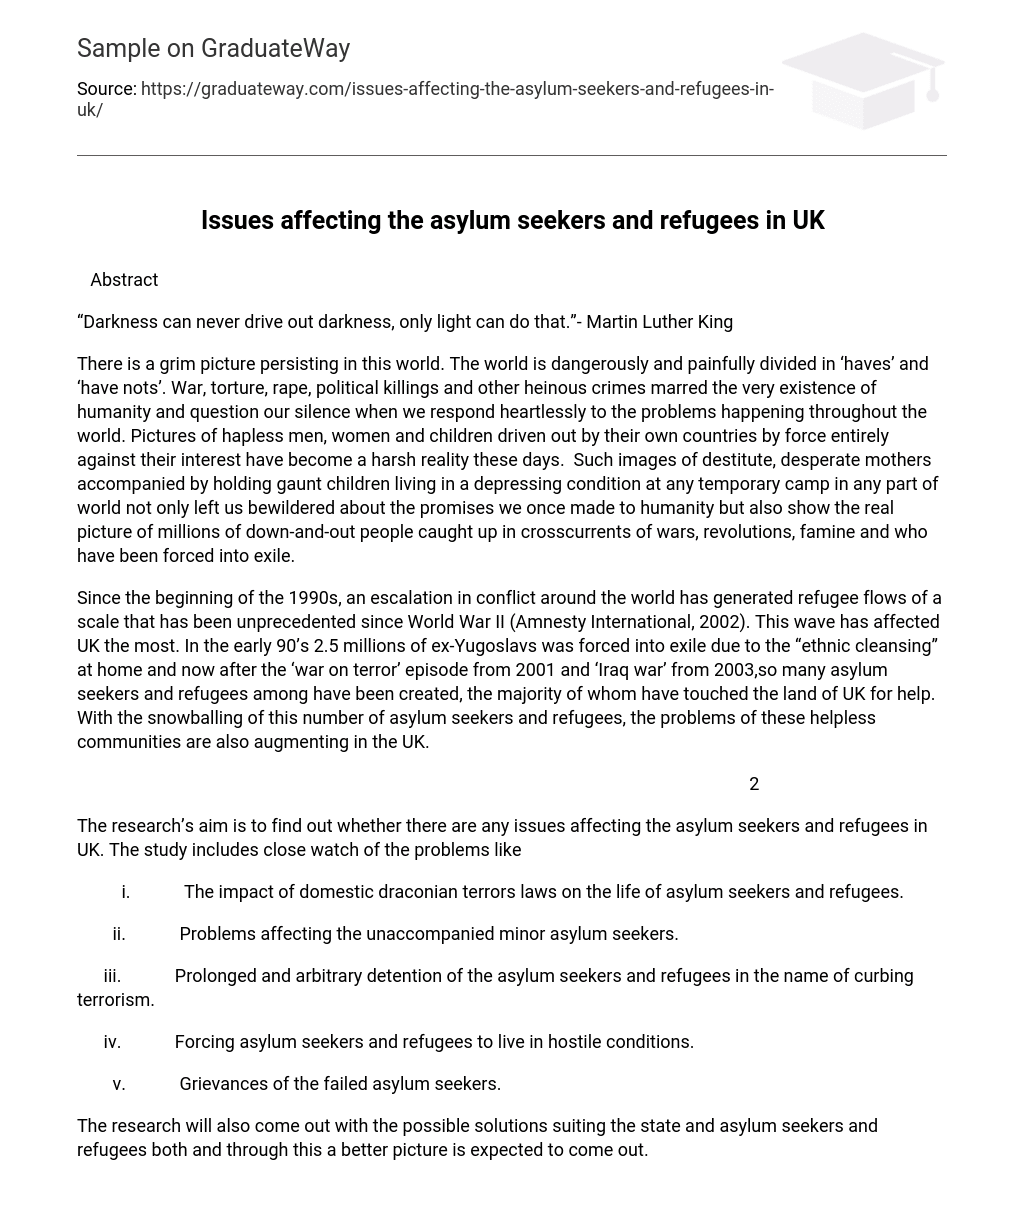 Issues affecting the asylum seekers and refugees in UK